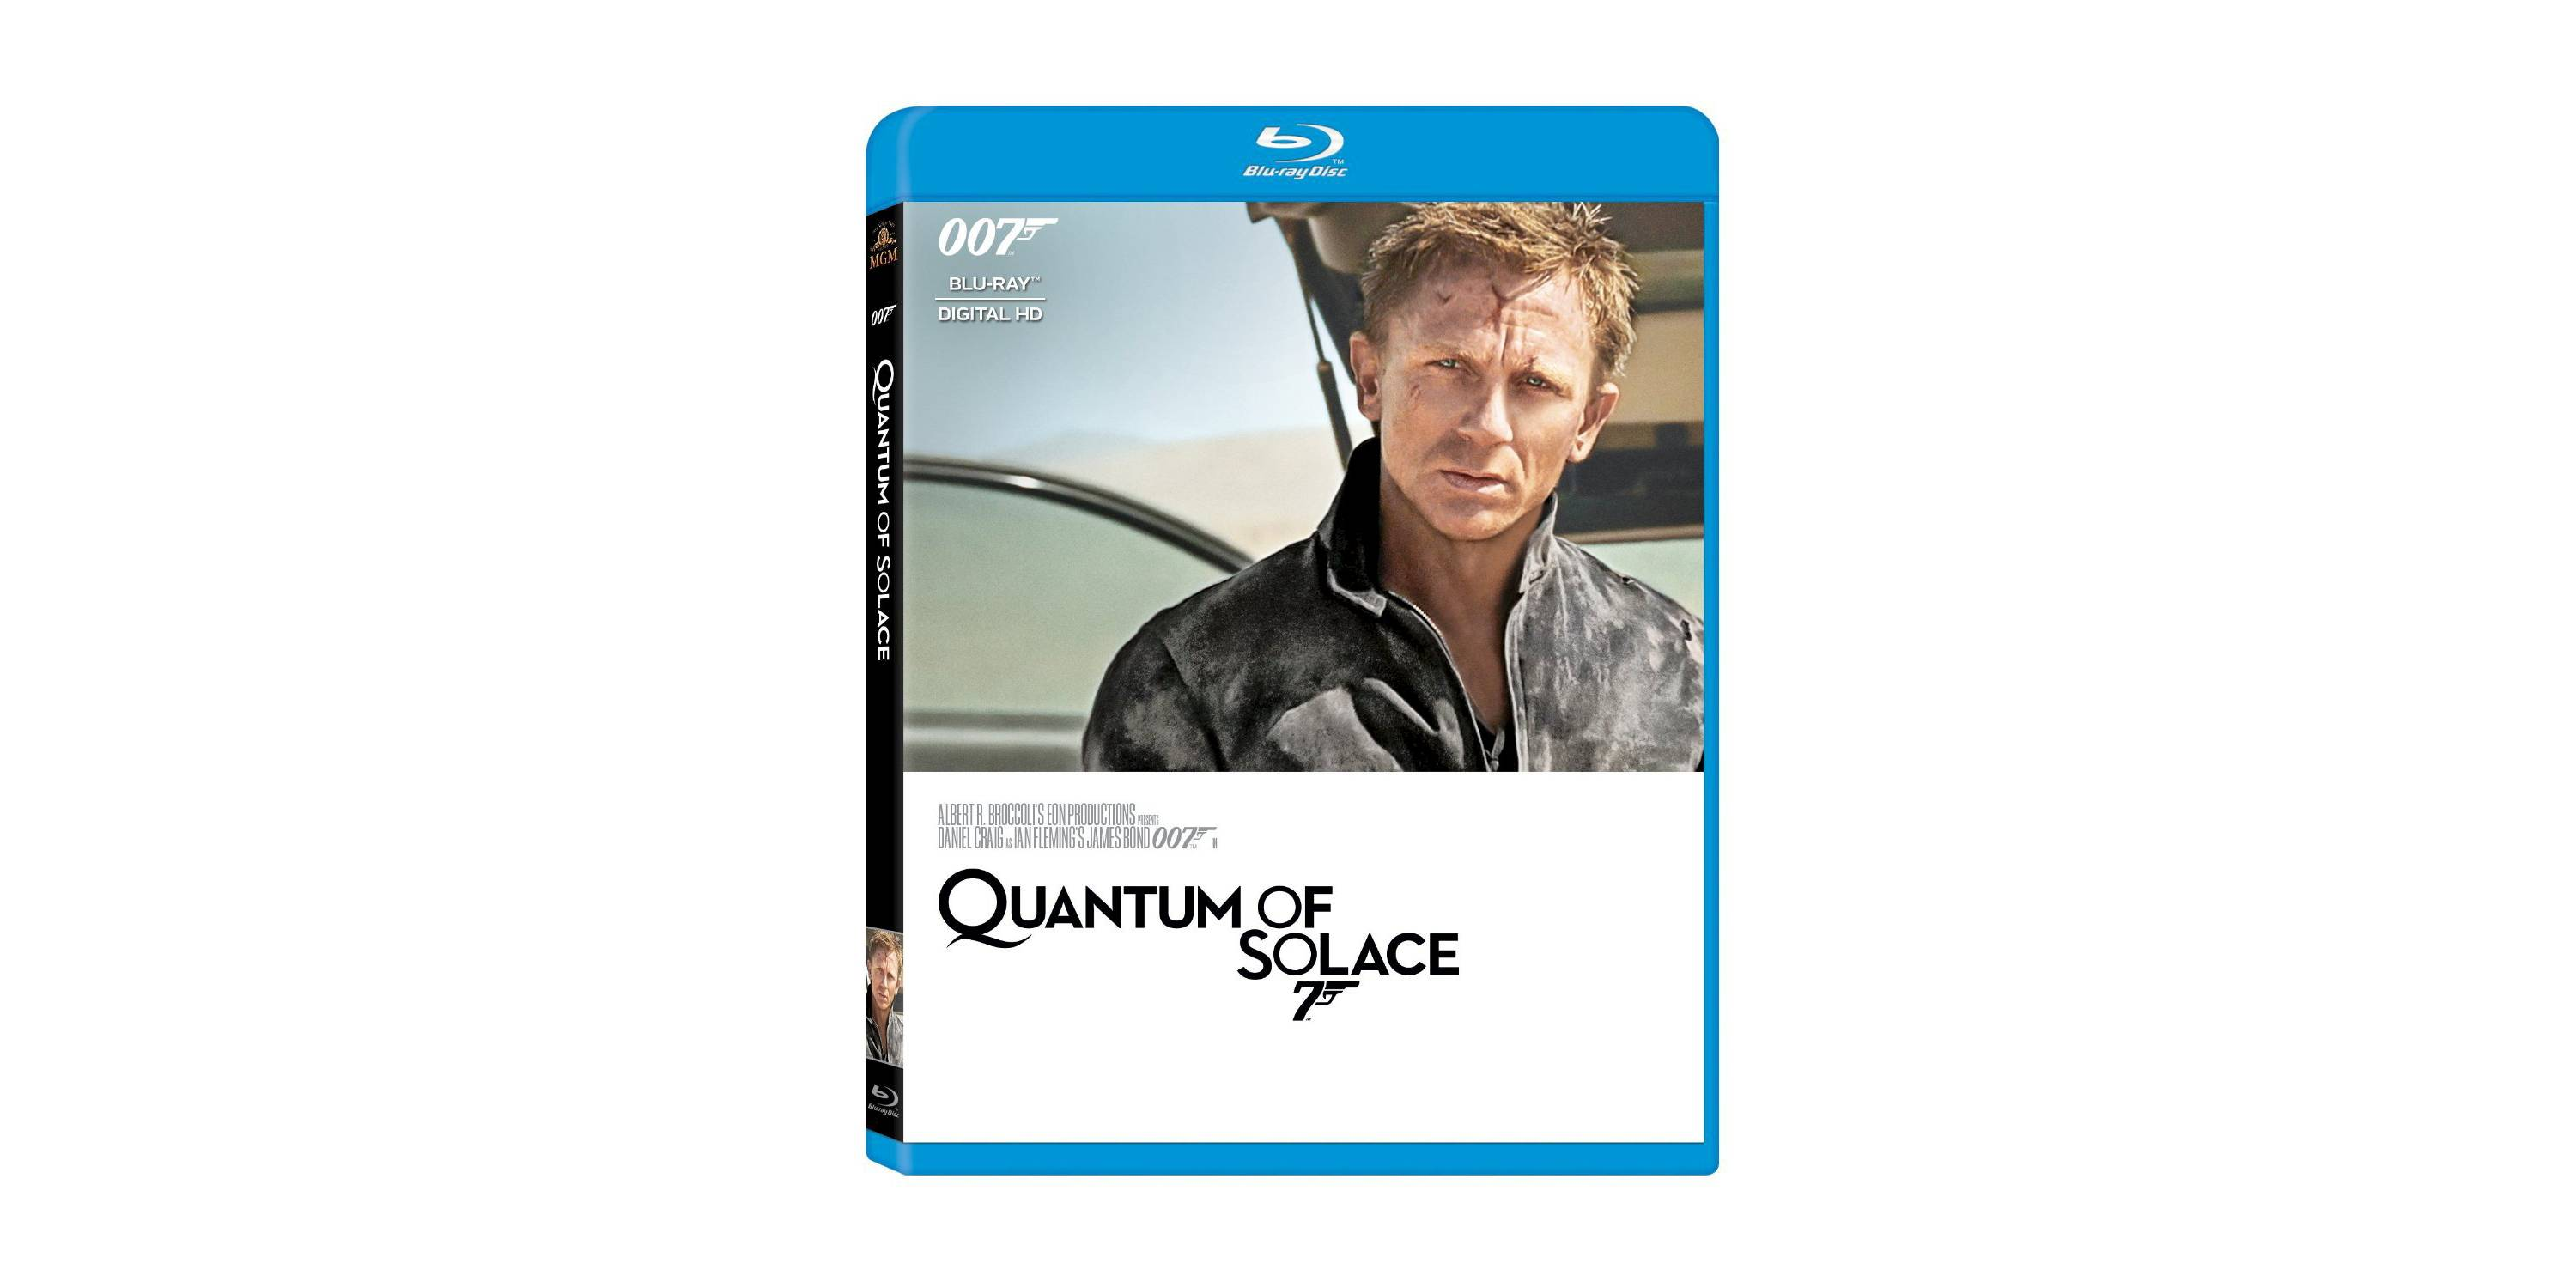 Quantum of Solace on Blu-Ray Only $4 SHIPPED!